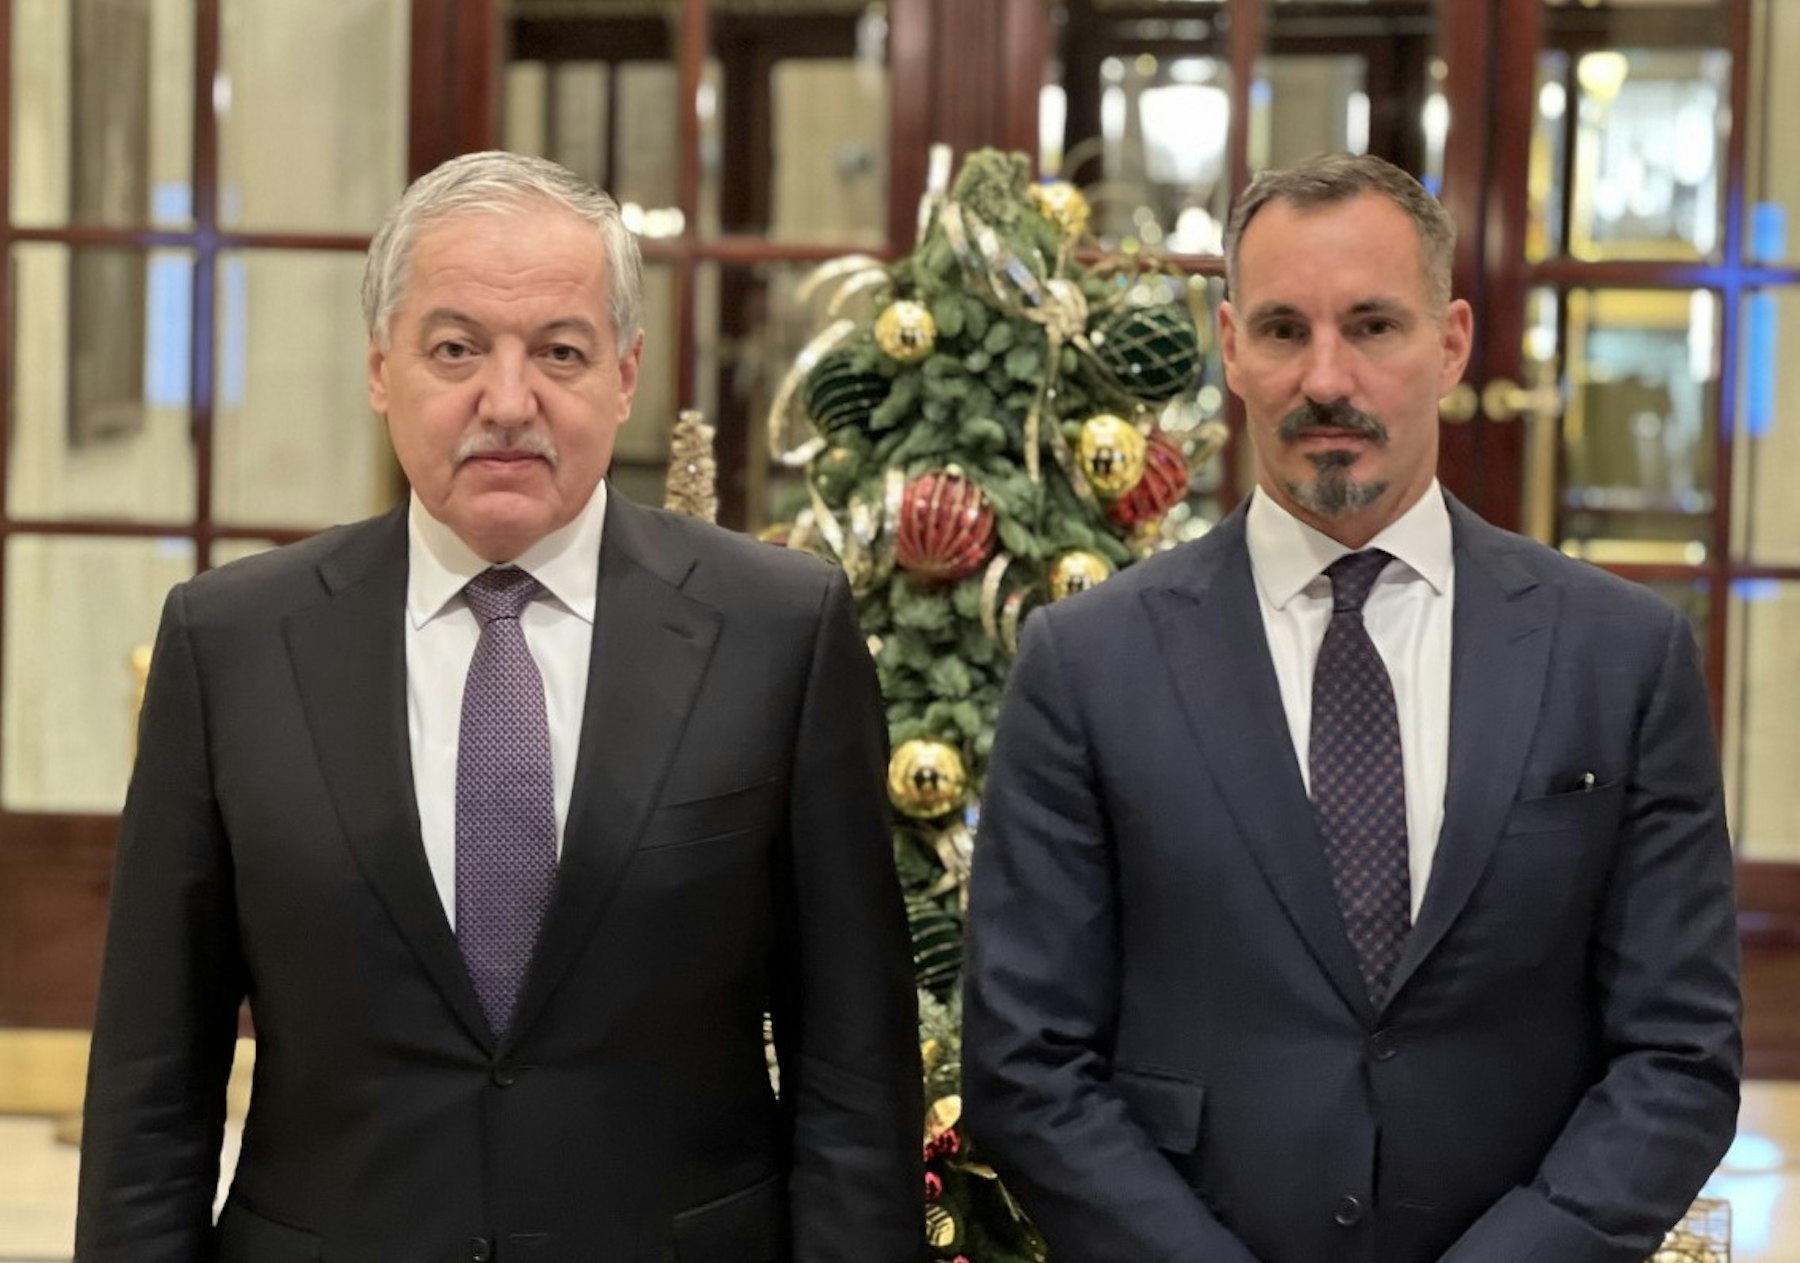 Prince Rahim Aga Khan today met with His Excellency Mr. Sirojiddin Muhriddin, the Foreign Minister of Tajikistan, in Paris. Mr Aslov is in France for meetings with the French government.